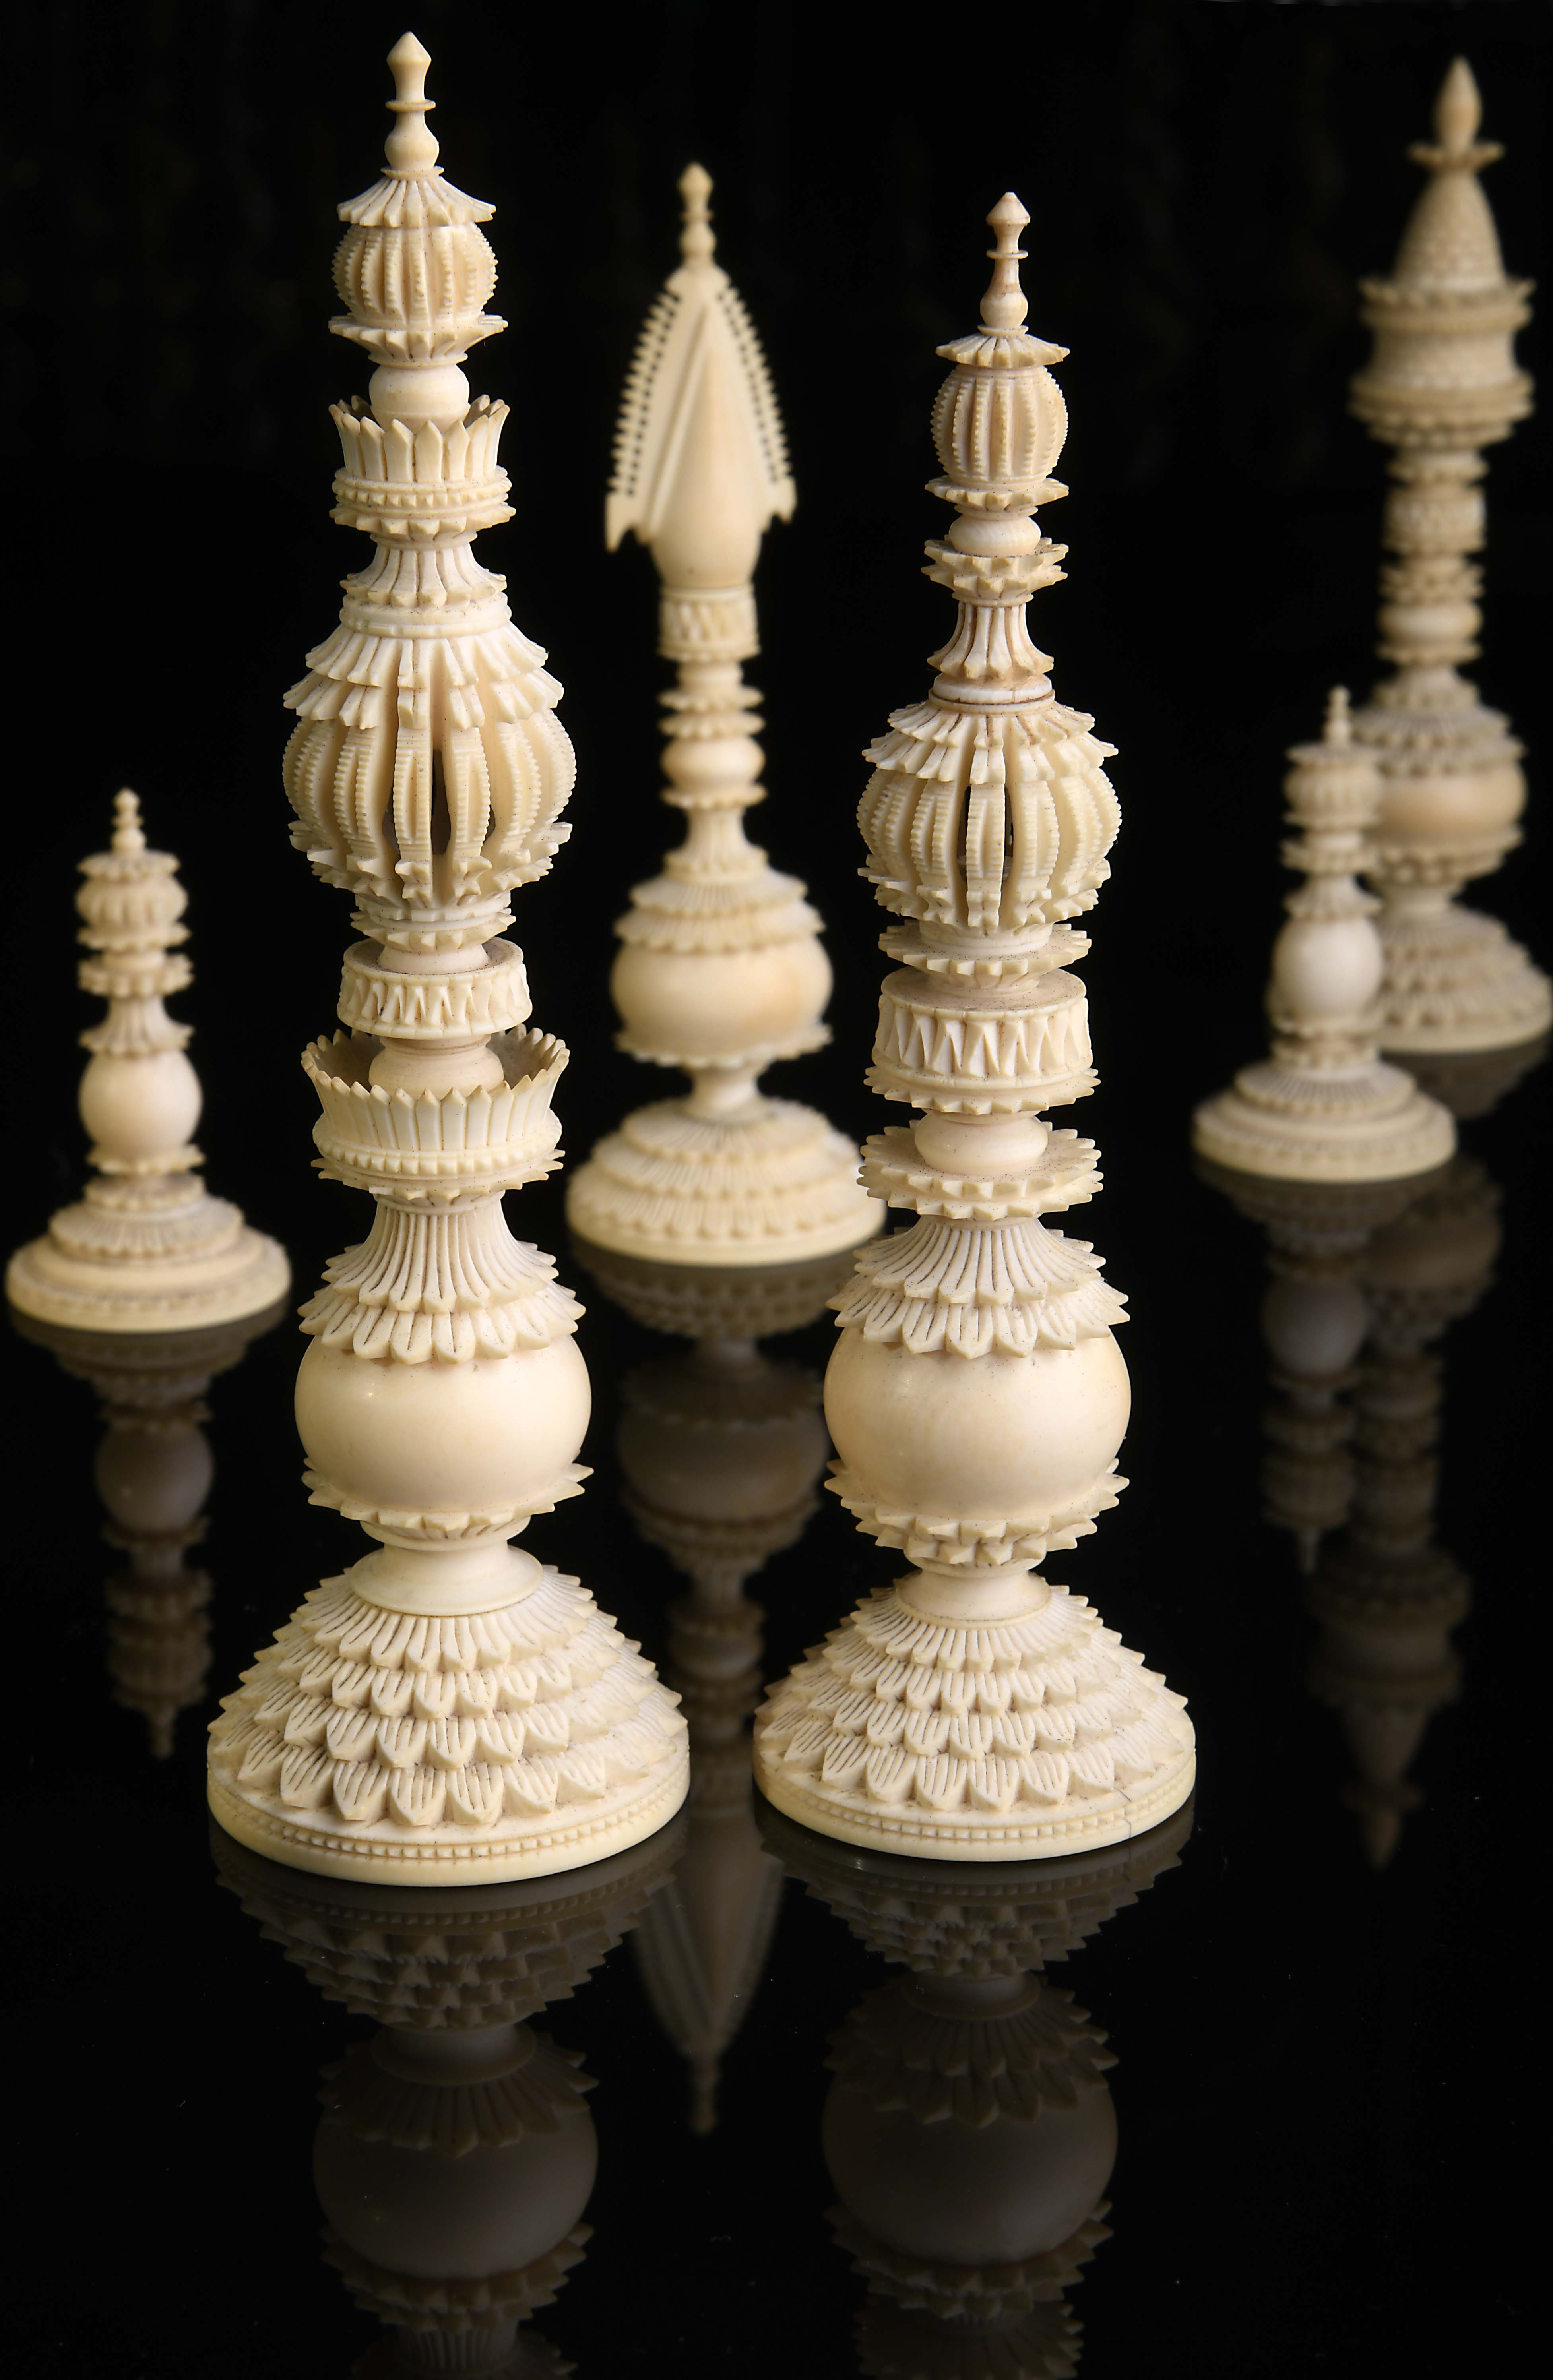 PEPYS Chess Pieces - Image 4 of 7